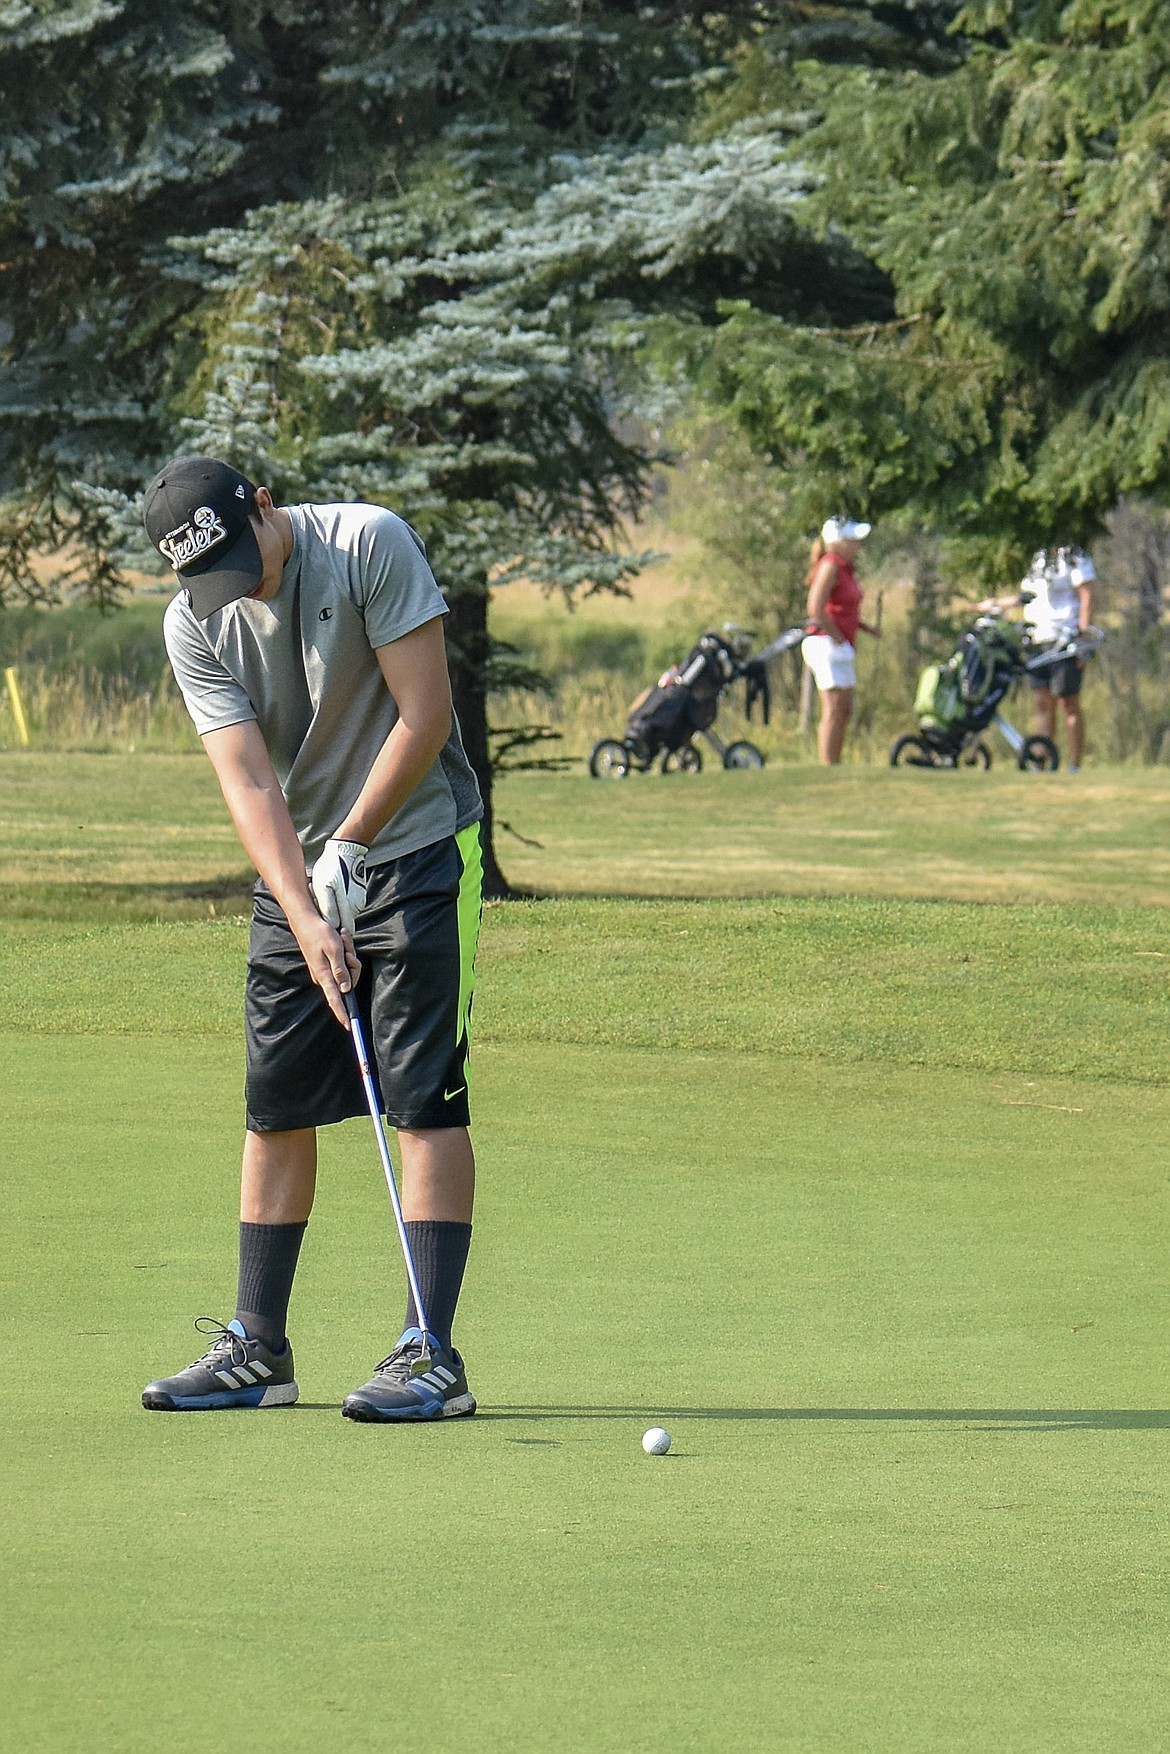 Junior Trey Thompson putts on the first hole at Cabinet View Golf Club Friday during the first morning practice for Logger golf. (Ben Kibbey/The Western News)